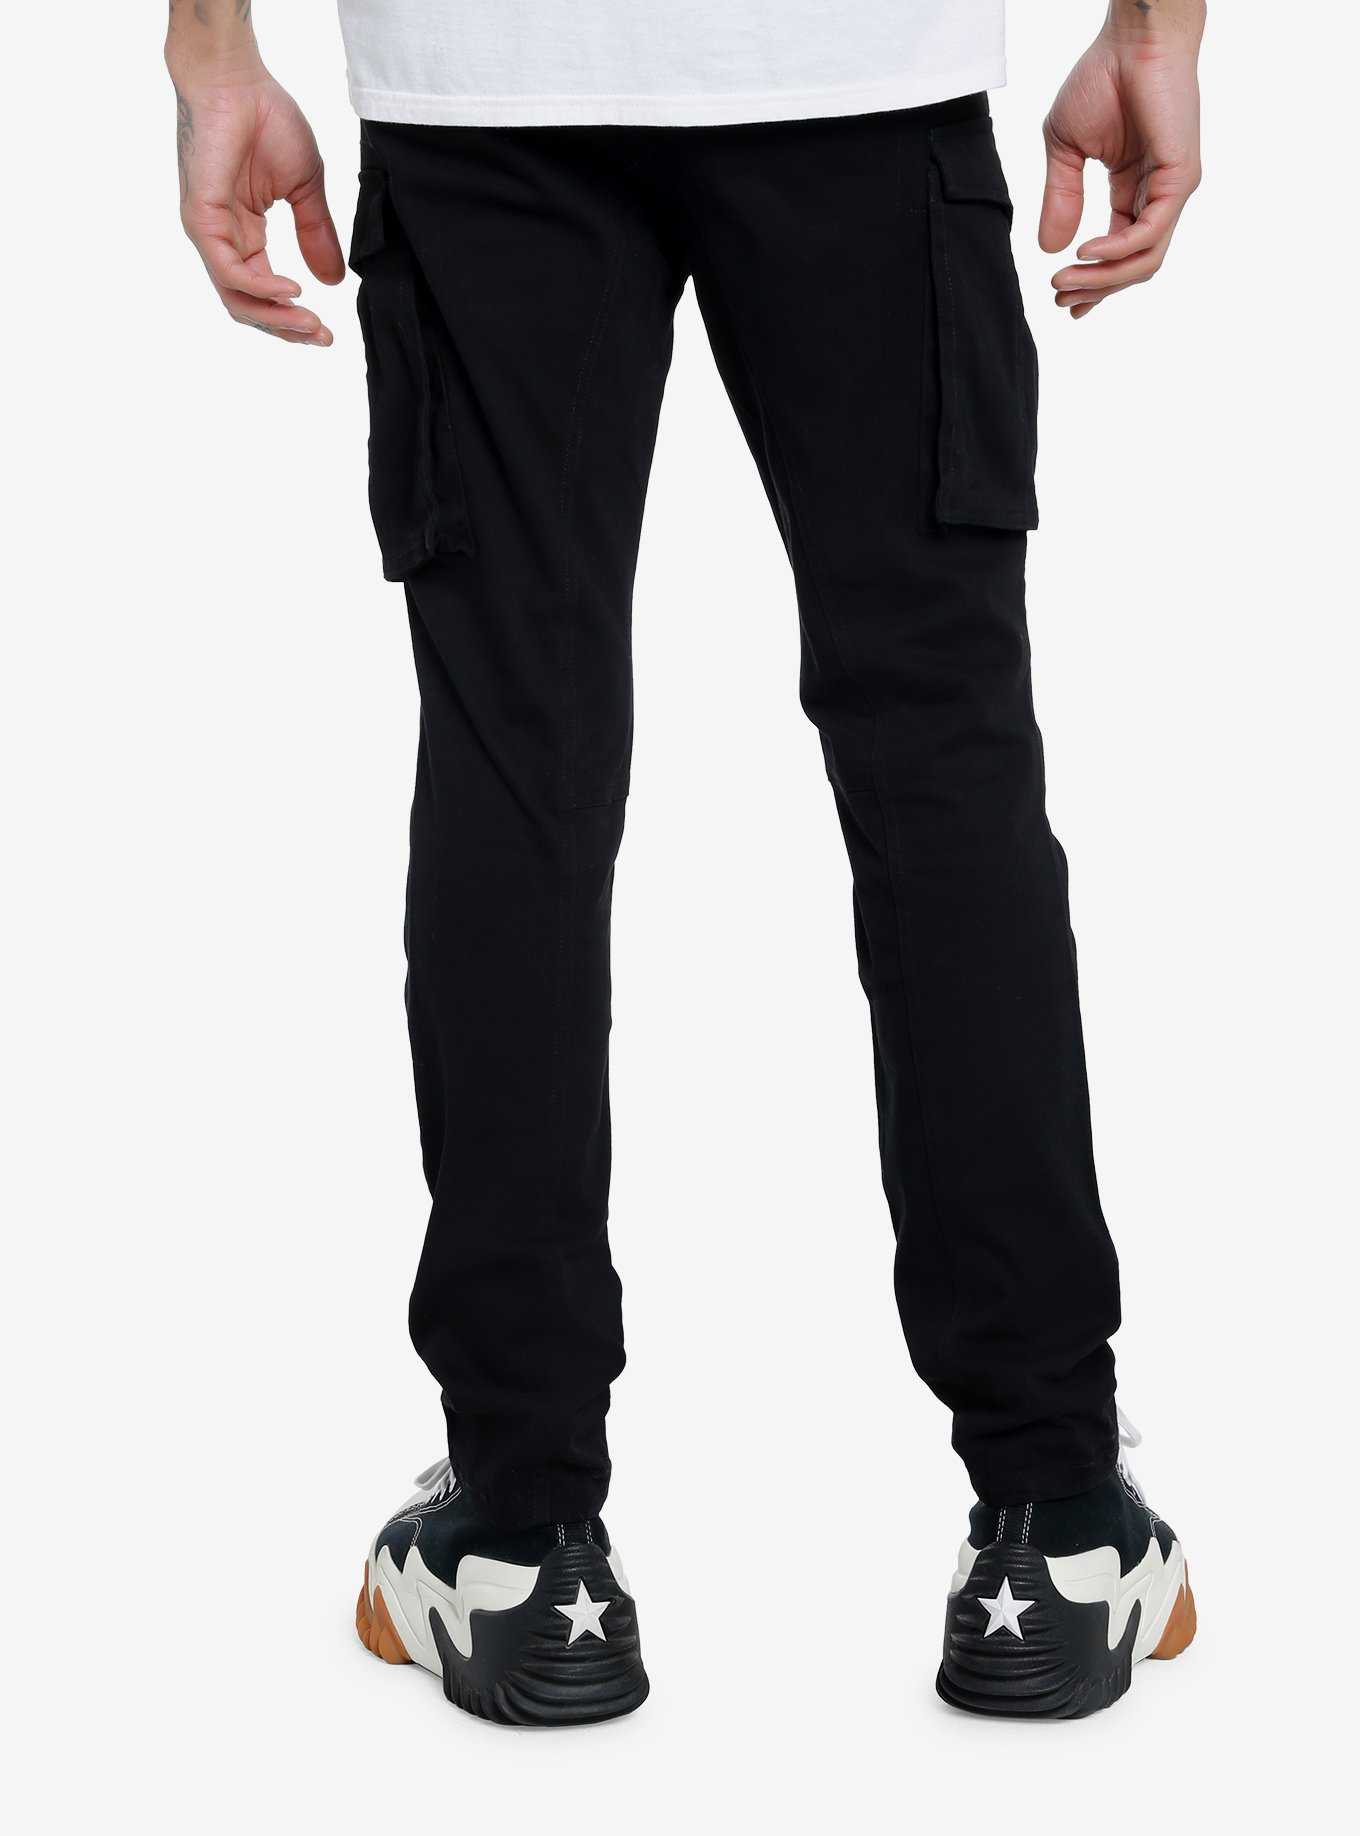 Black Fitted Cargo Pants, , hi-res